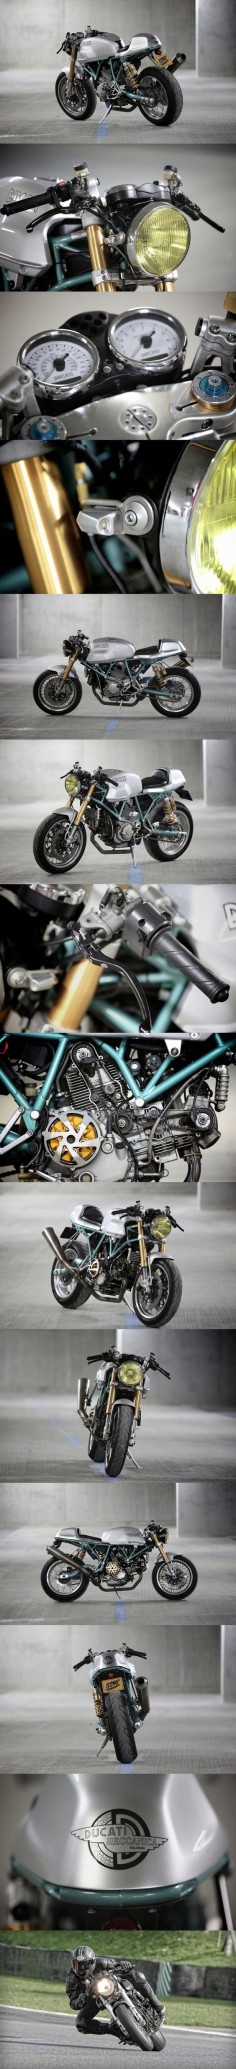 Ducati Paul Smart 1000LE Cafe Racer - by Dutch and Cafe Racer Customs